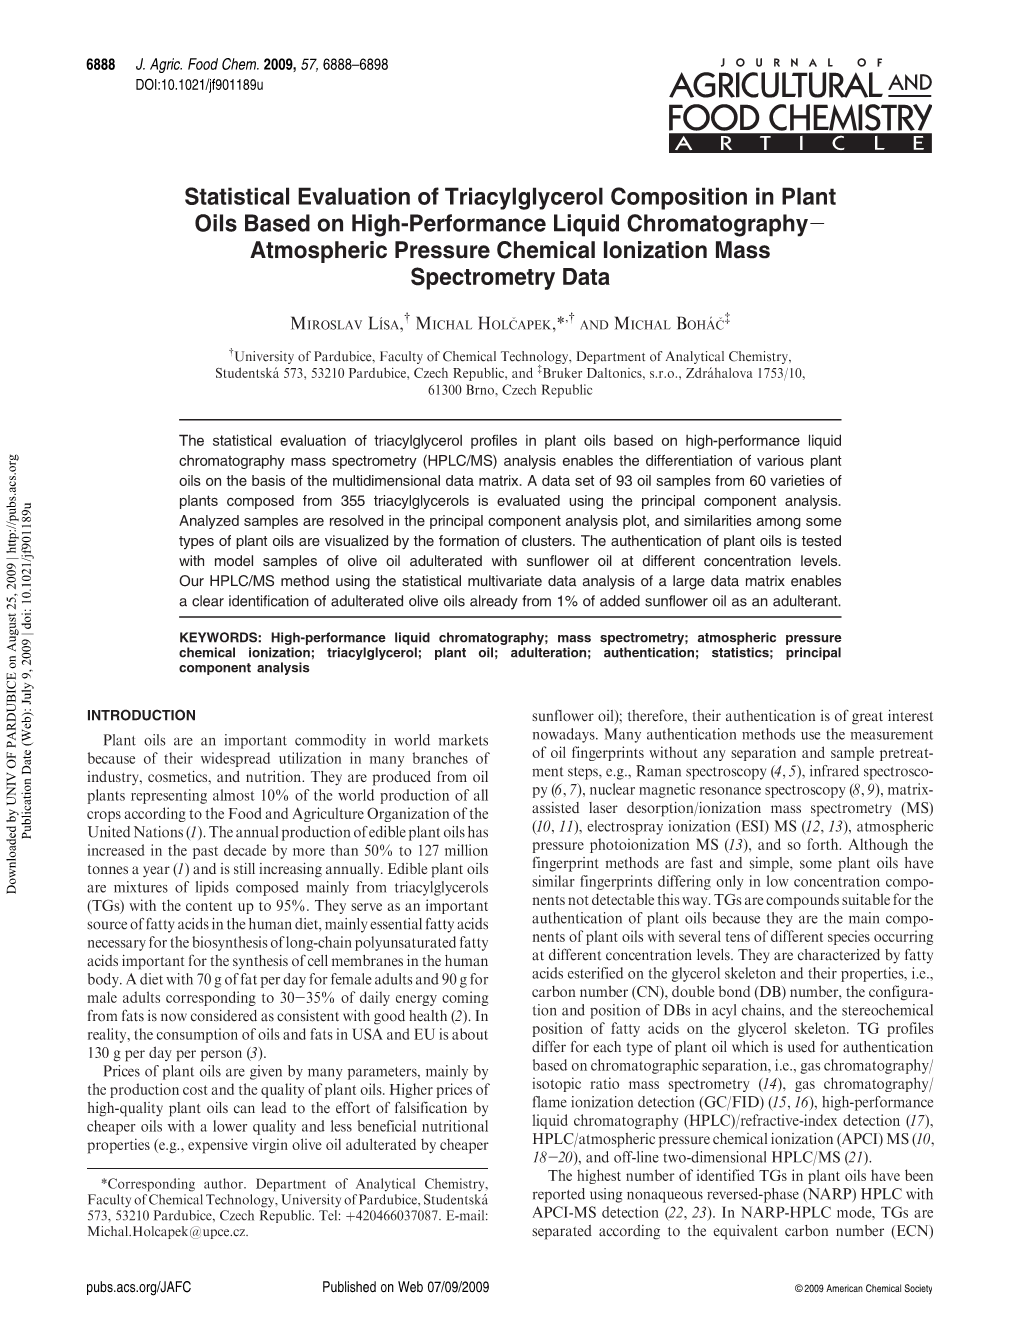 Statistical Evaluation of Triacylglycerol Composition in Plant Oils Based